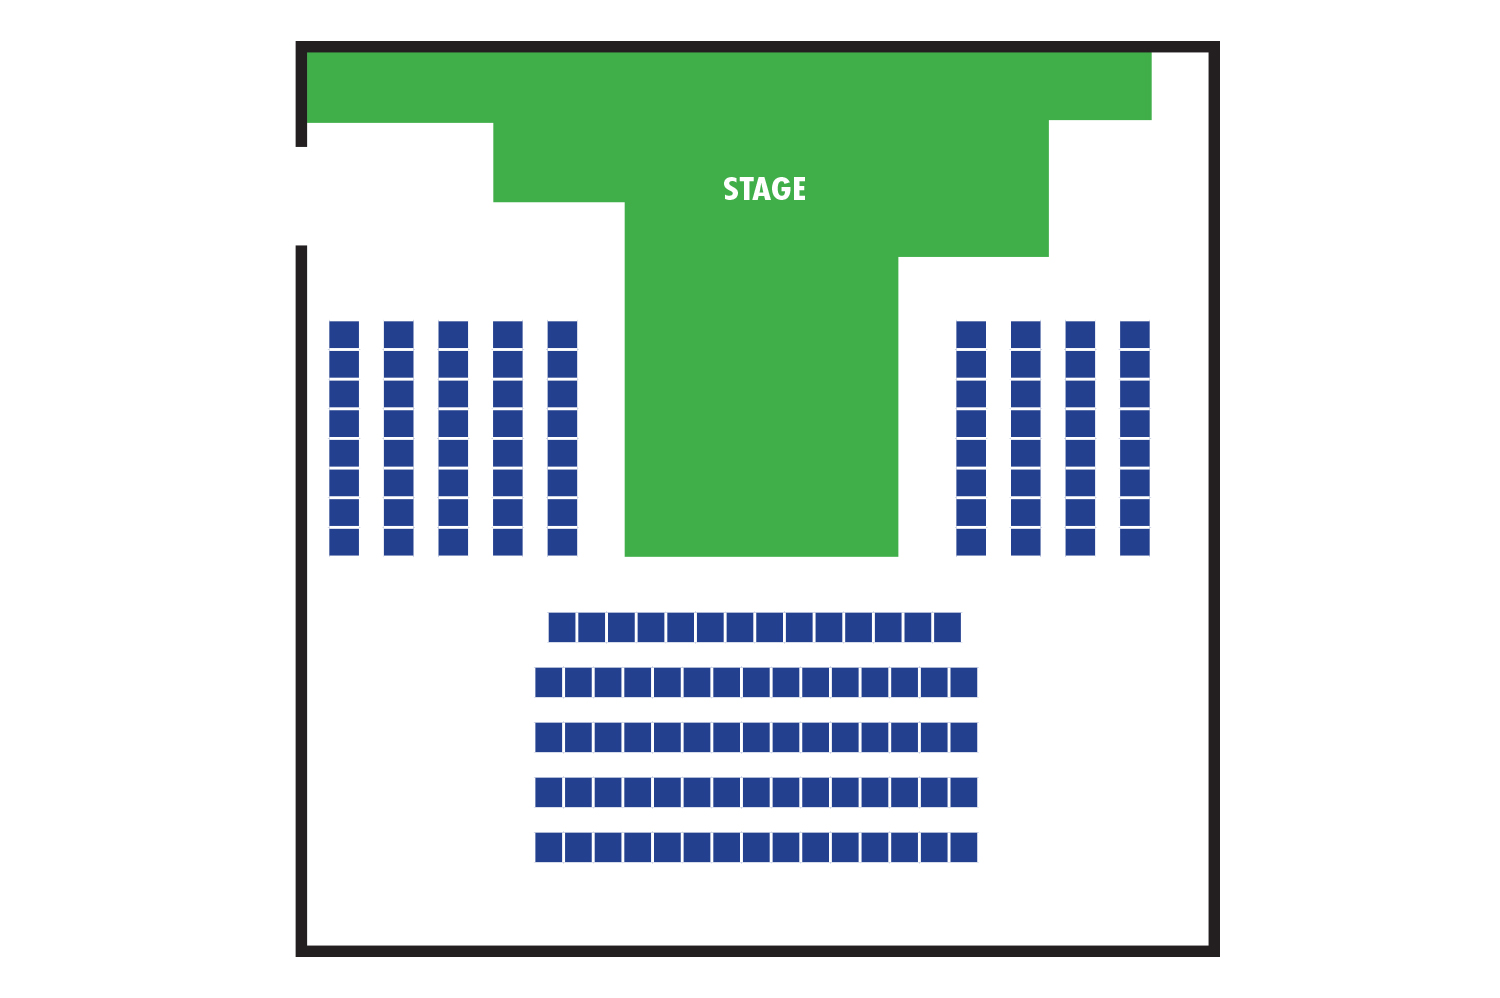 Olney Theater Seating Chart